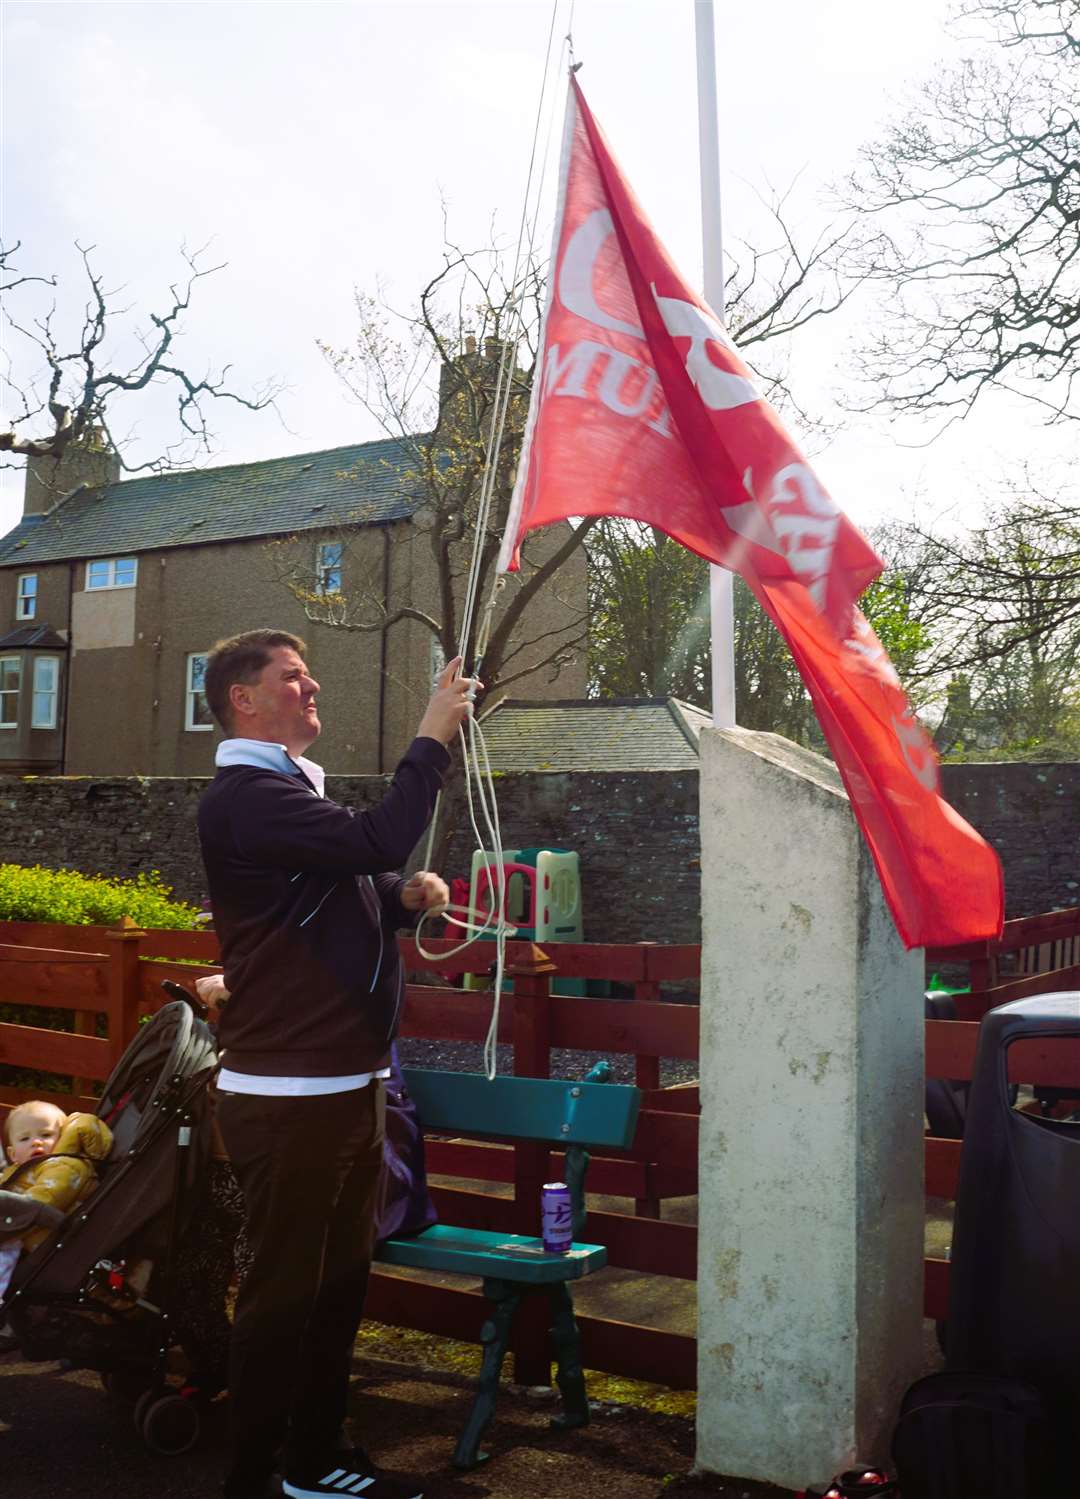 Graham raises the Munro Shield flag to highlight that the club won this accolade over the last season. Picture: DGS